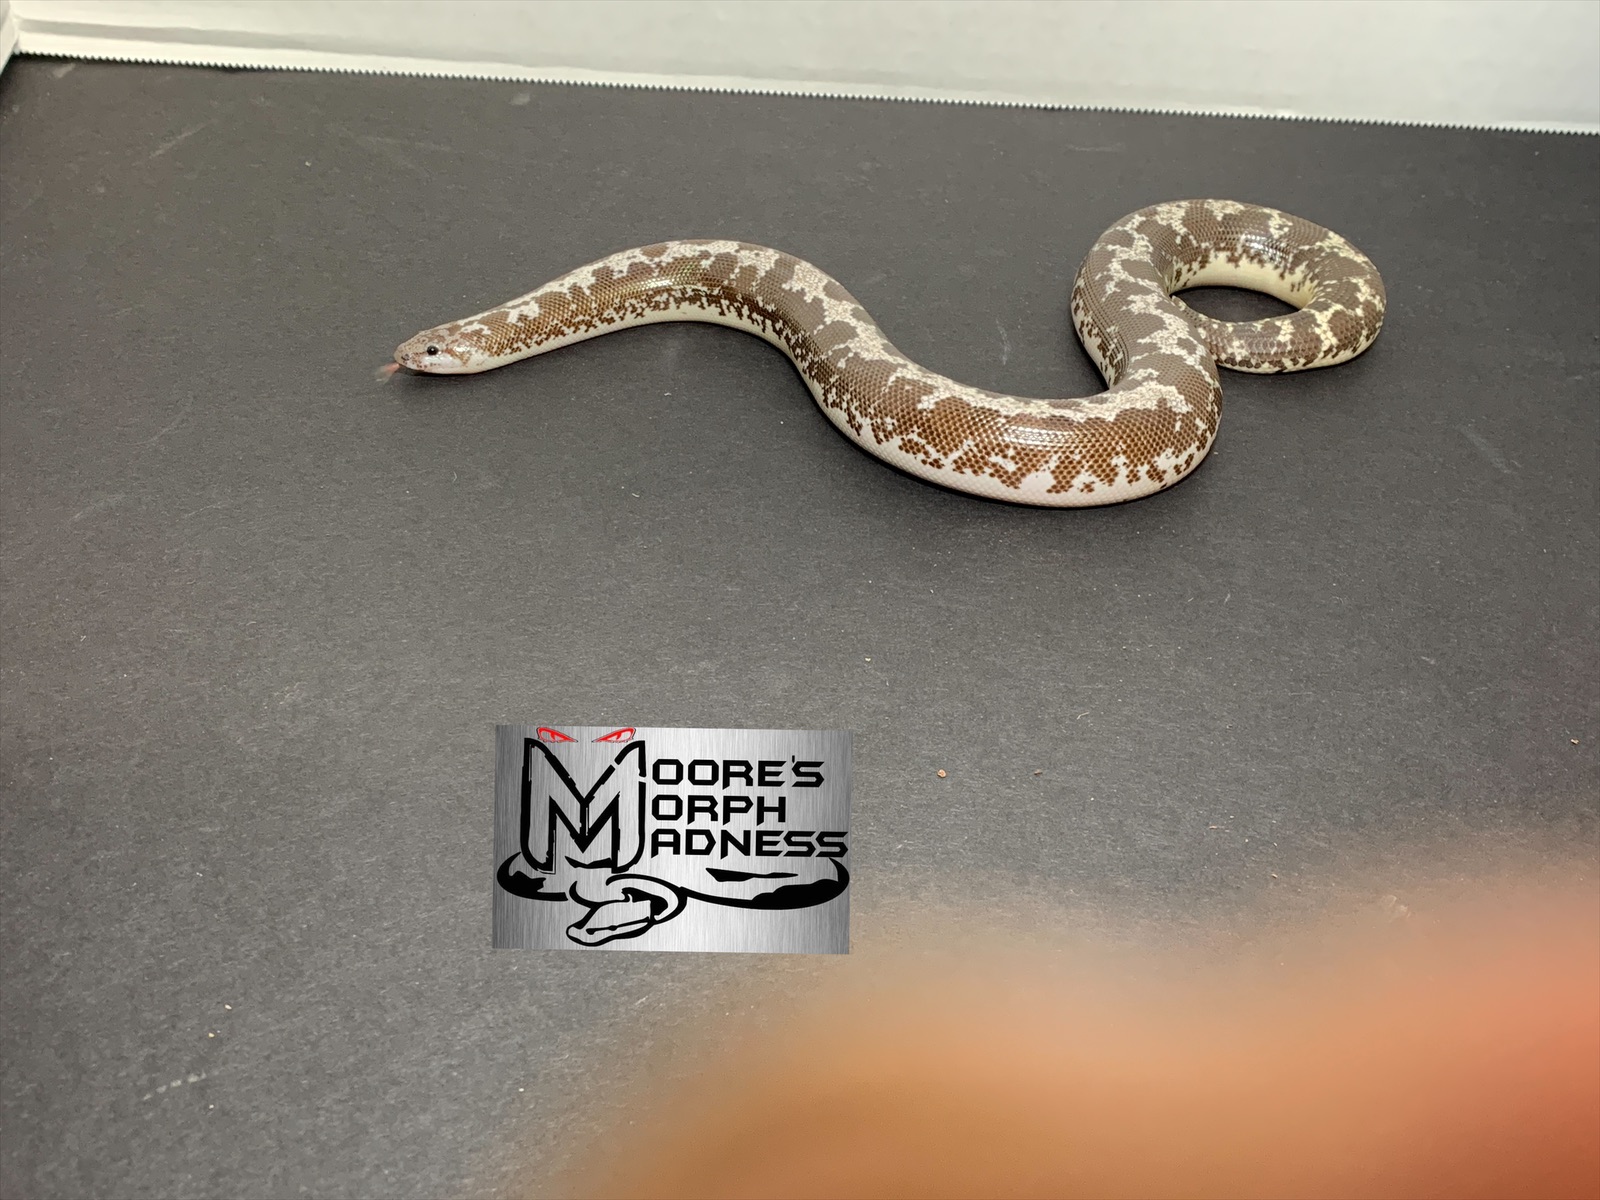 Anery Sand Boa by Moore’s Morph Madness